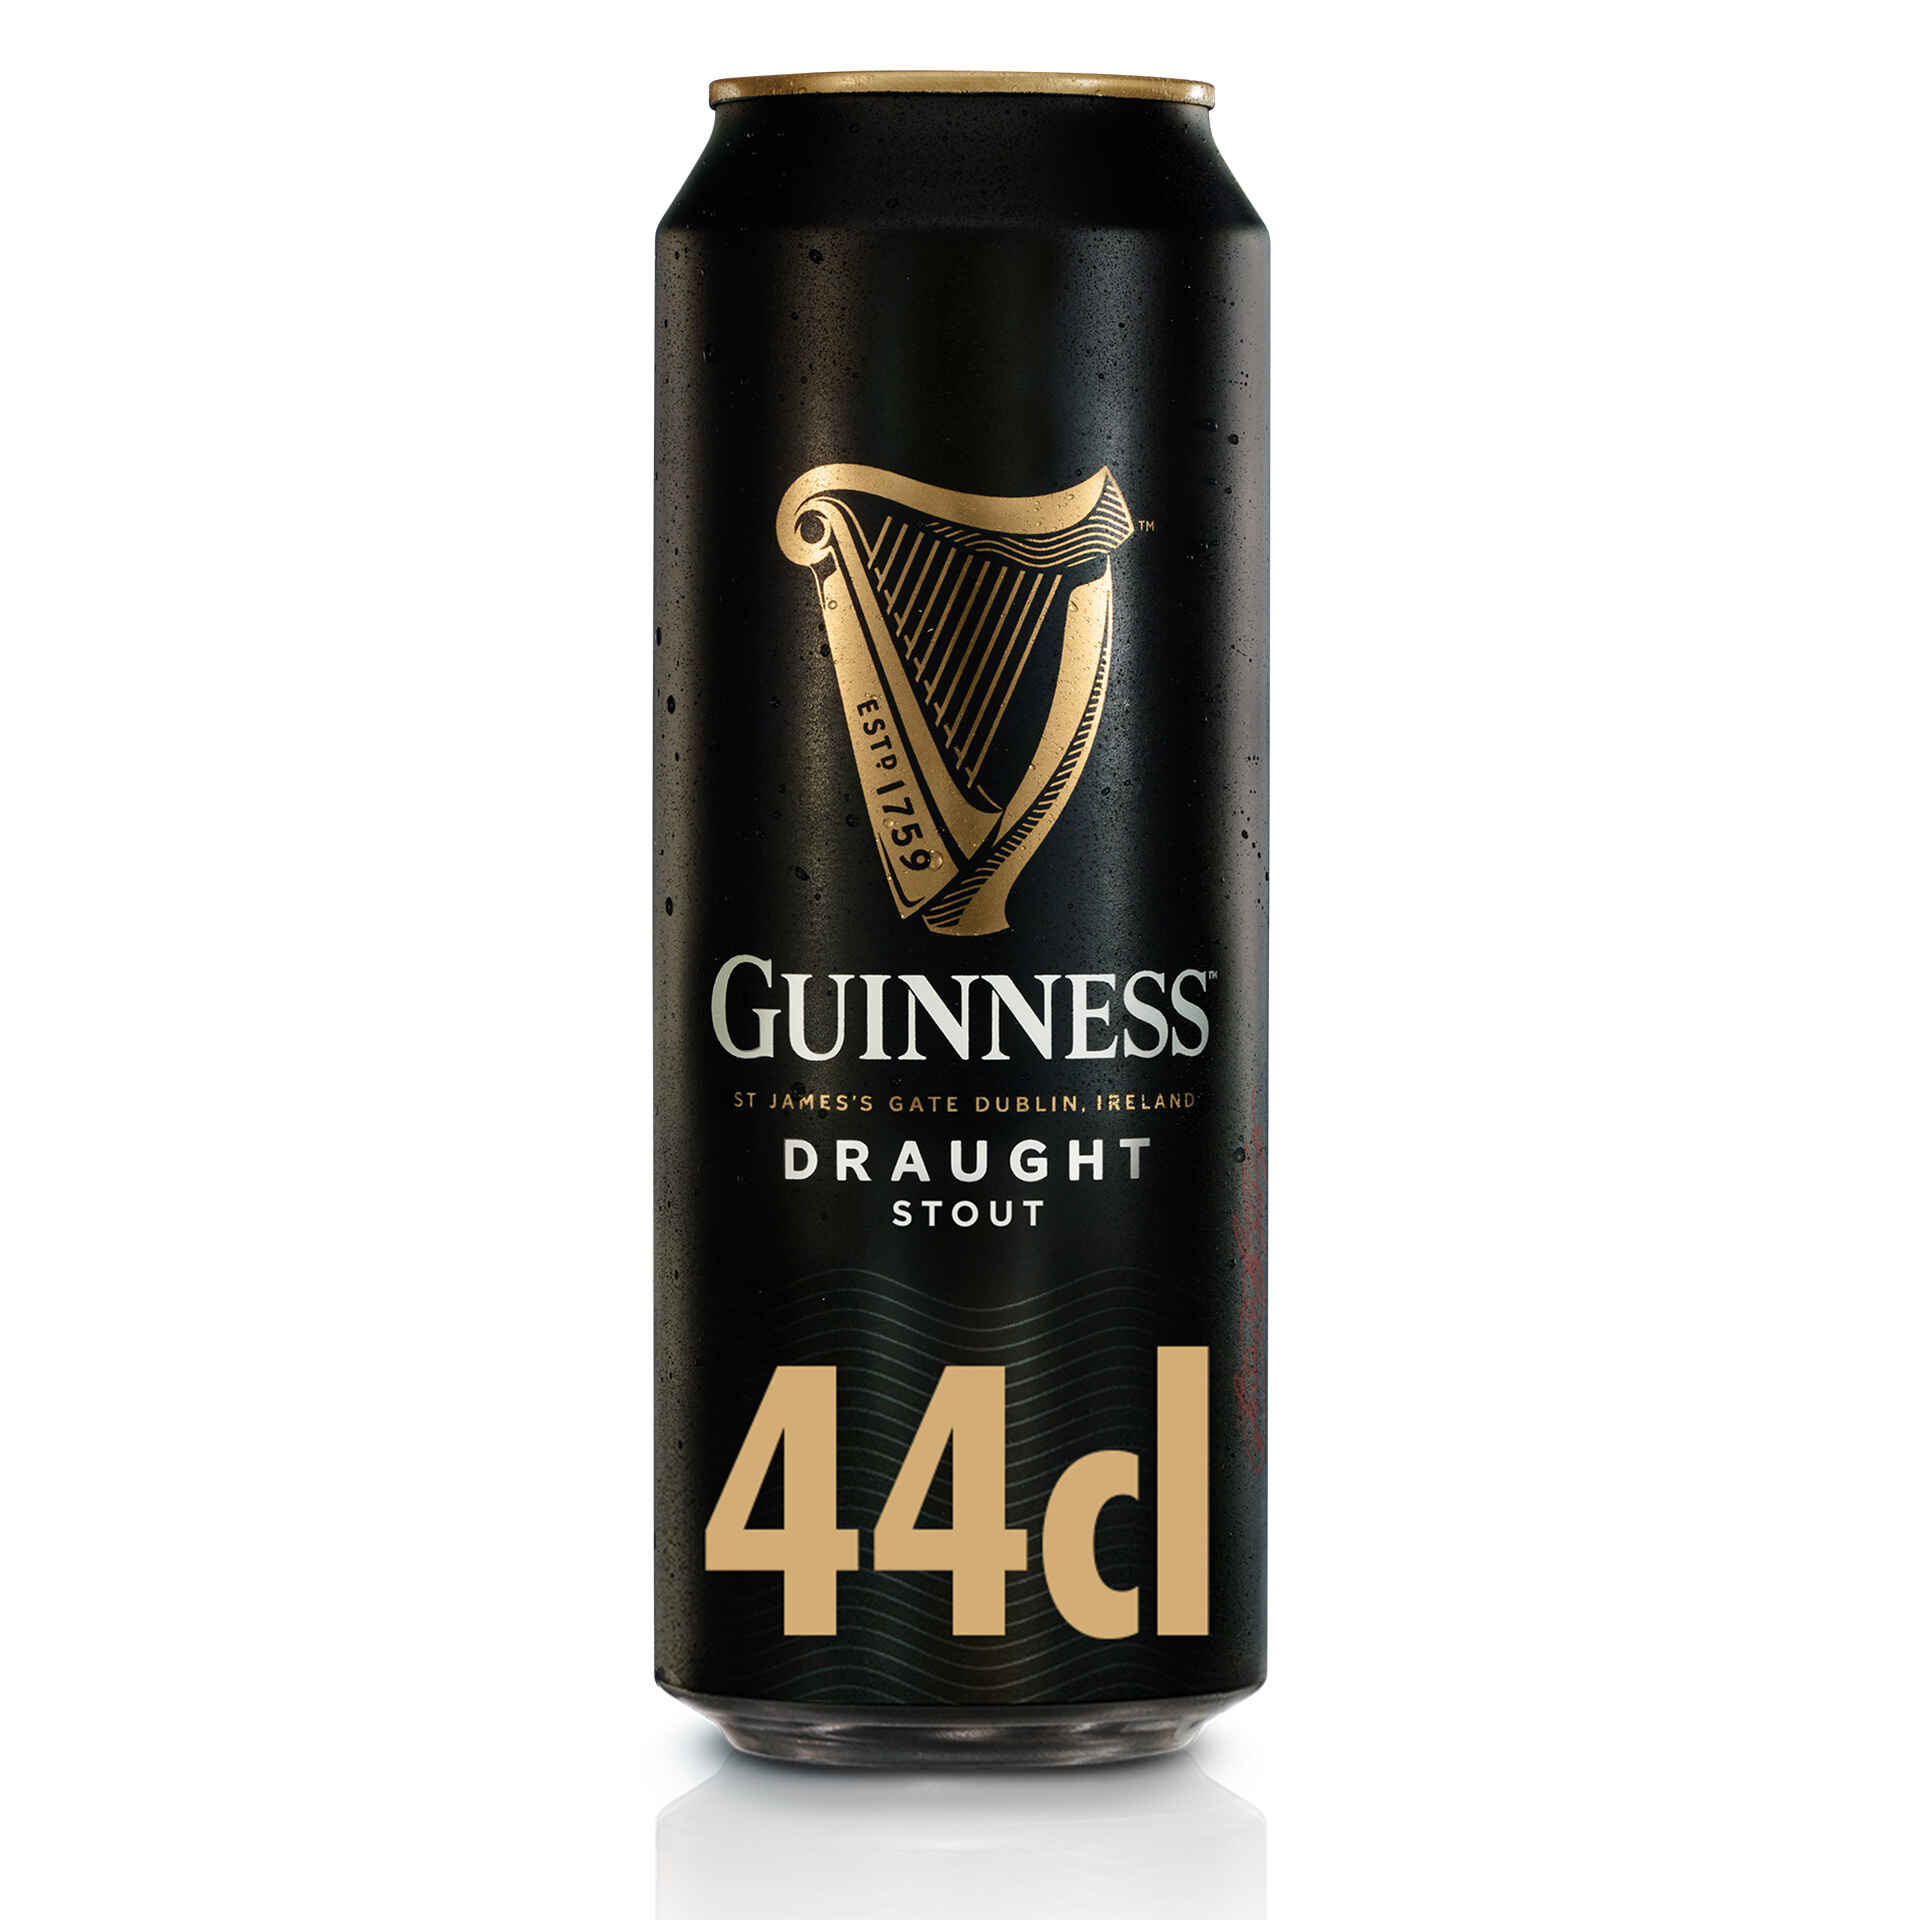 Guinness Draught 0.0% Stout 50cl